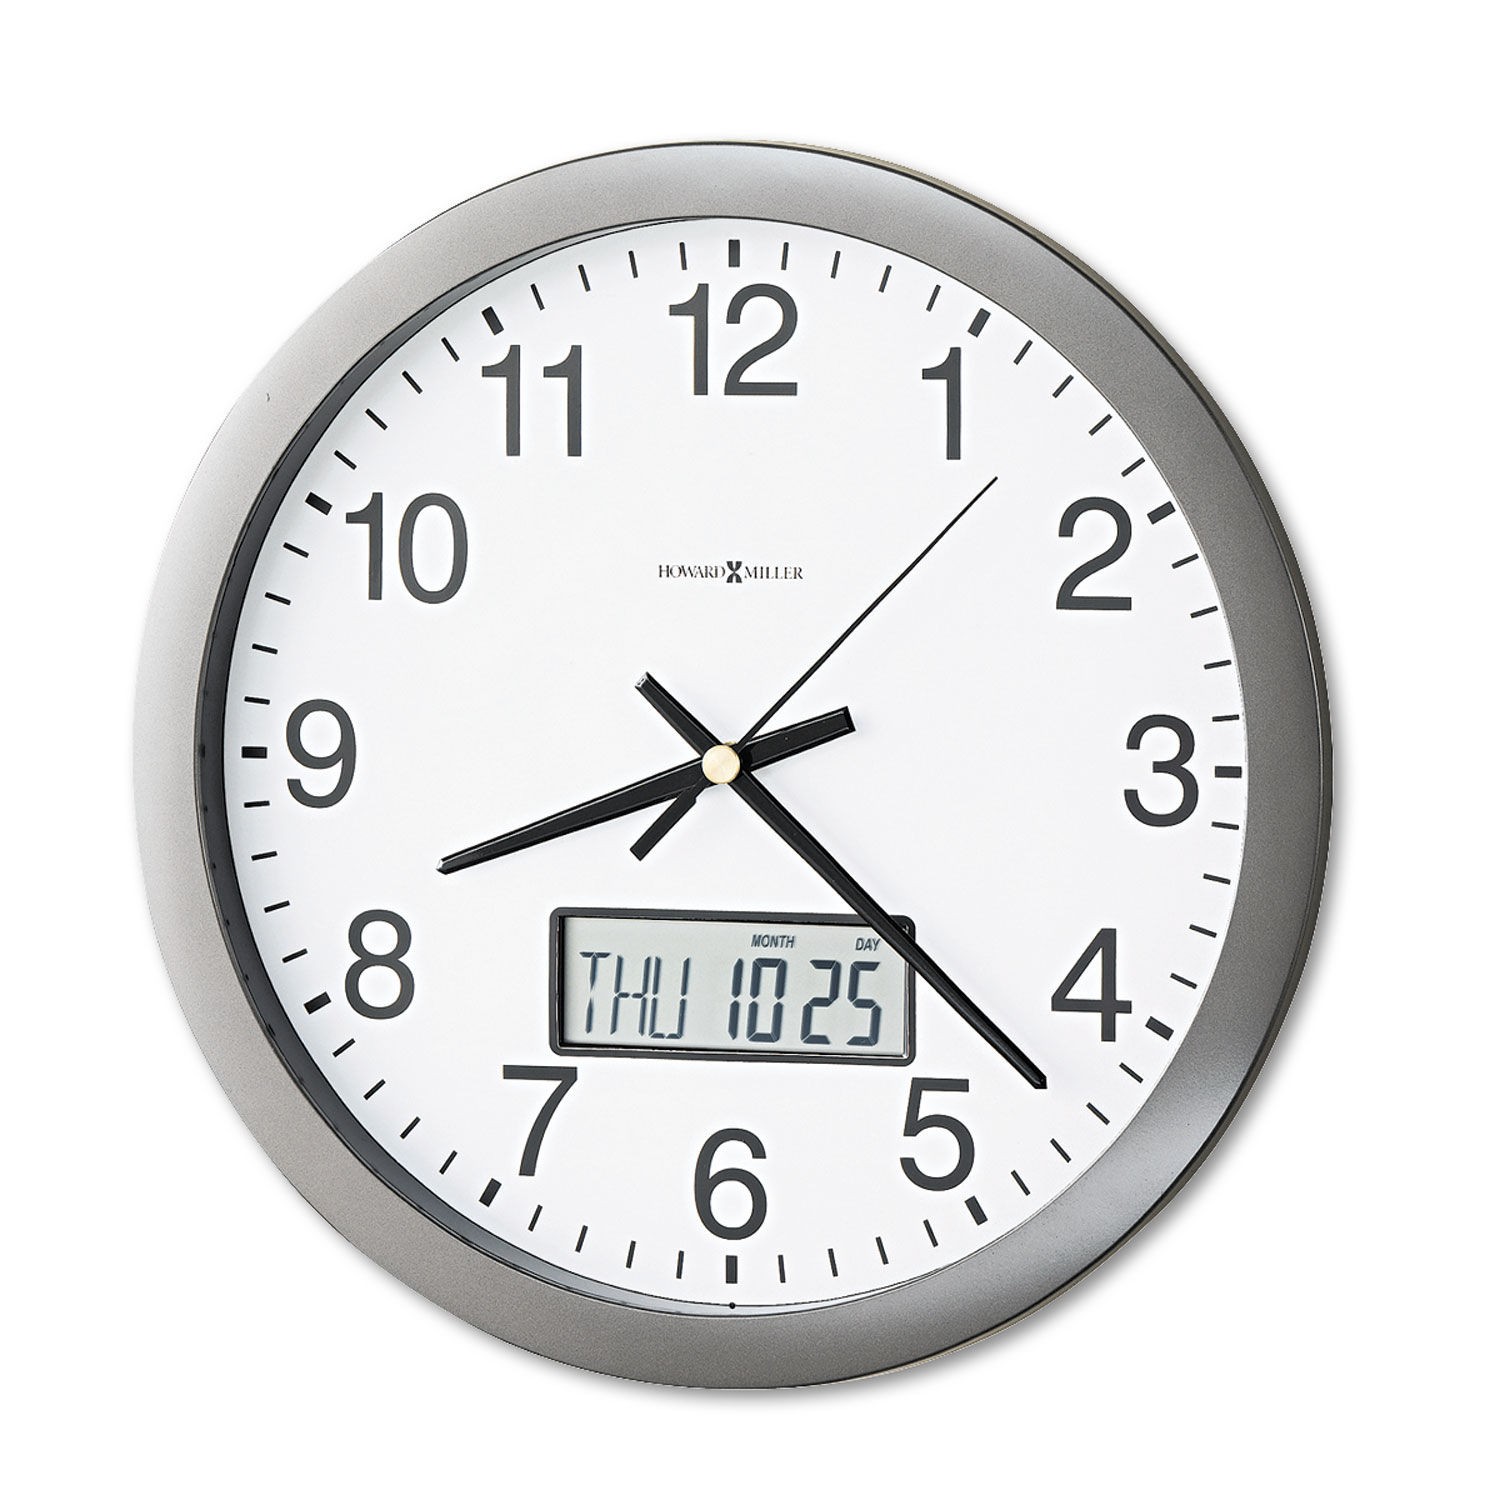 A wall clock by howard miller that also shows the